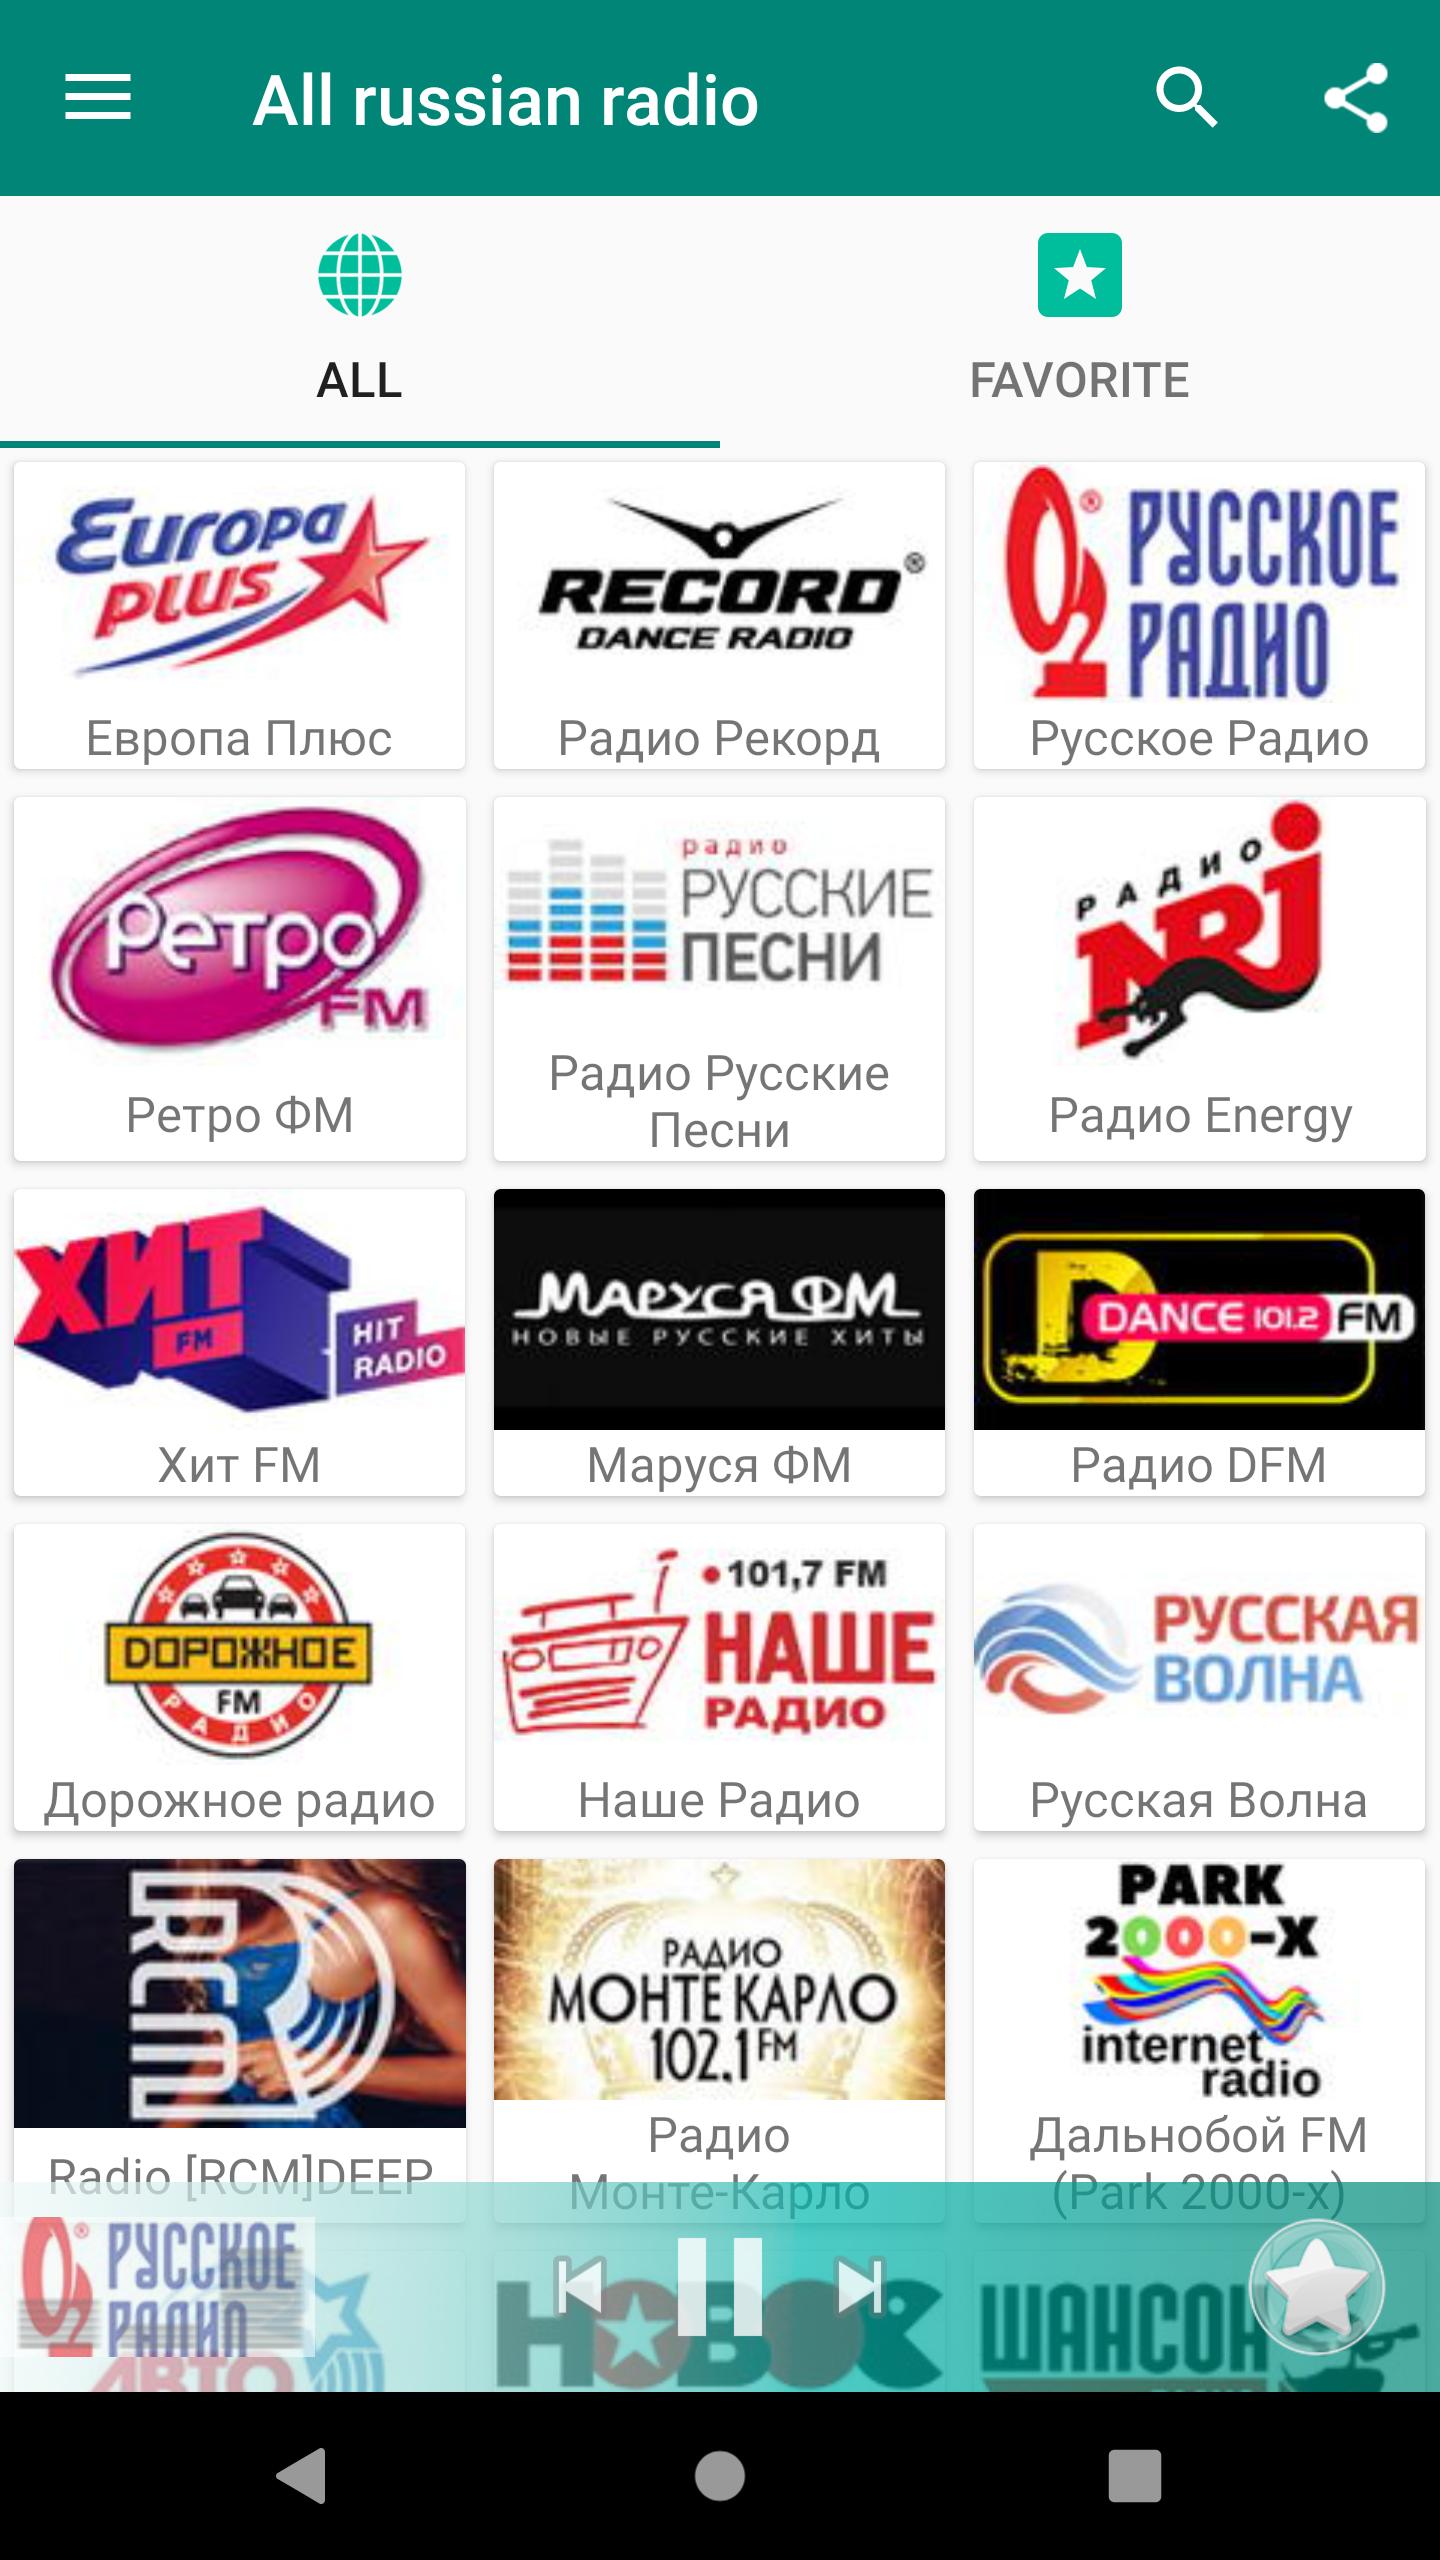 All radio stations in Russia for Android - APK Download